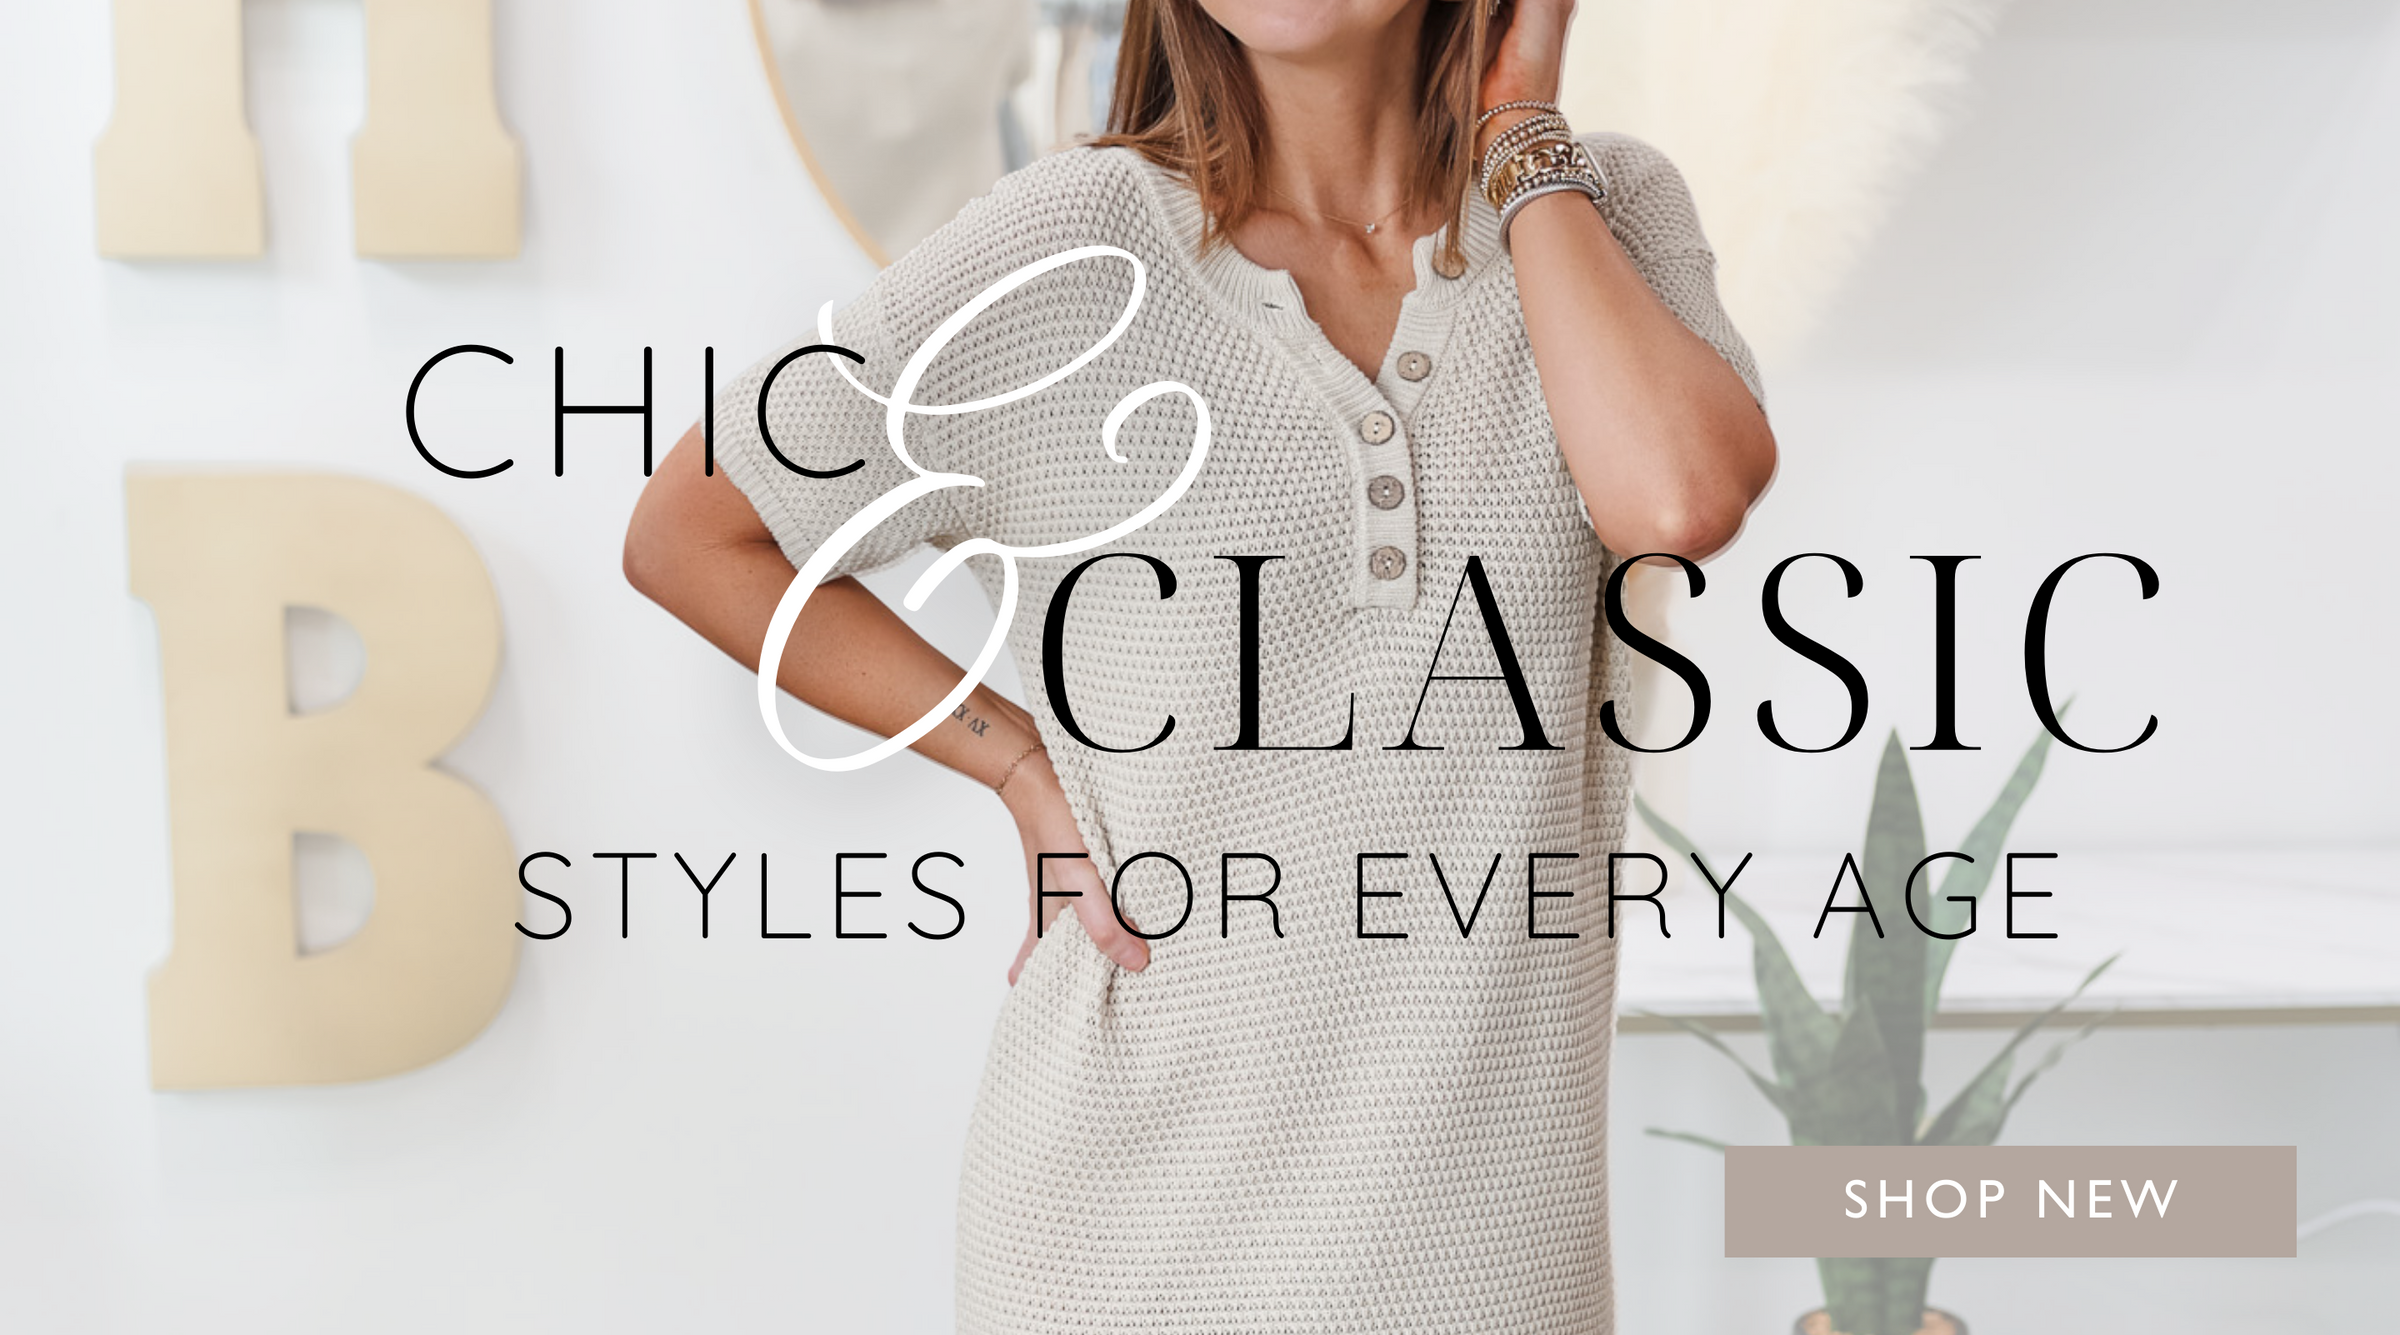 Close up photo of a brunette girl wearing a tan dress. The text reads "Chic & classic styles for every age" with a button that says shop new.